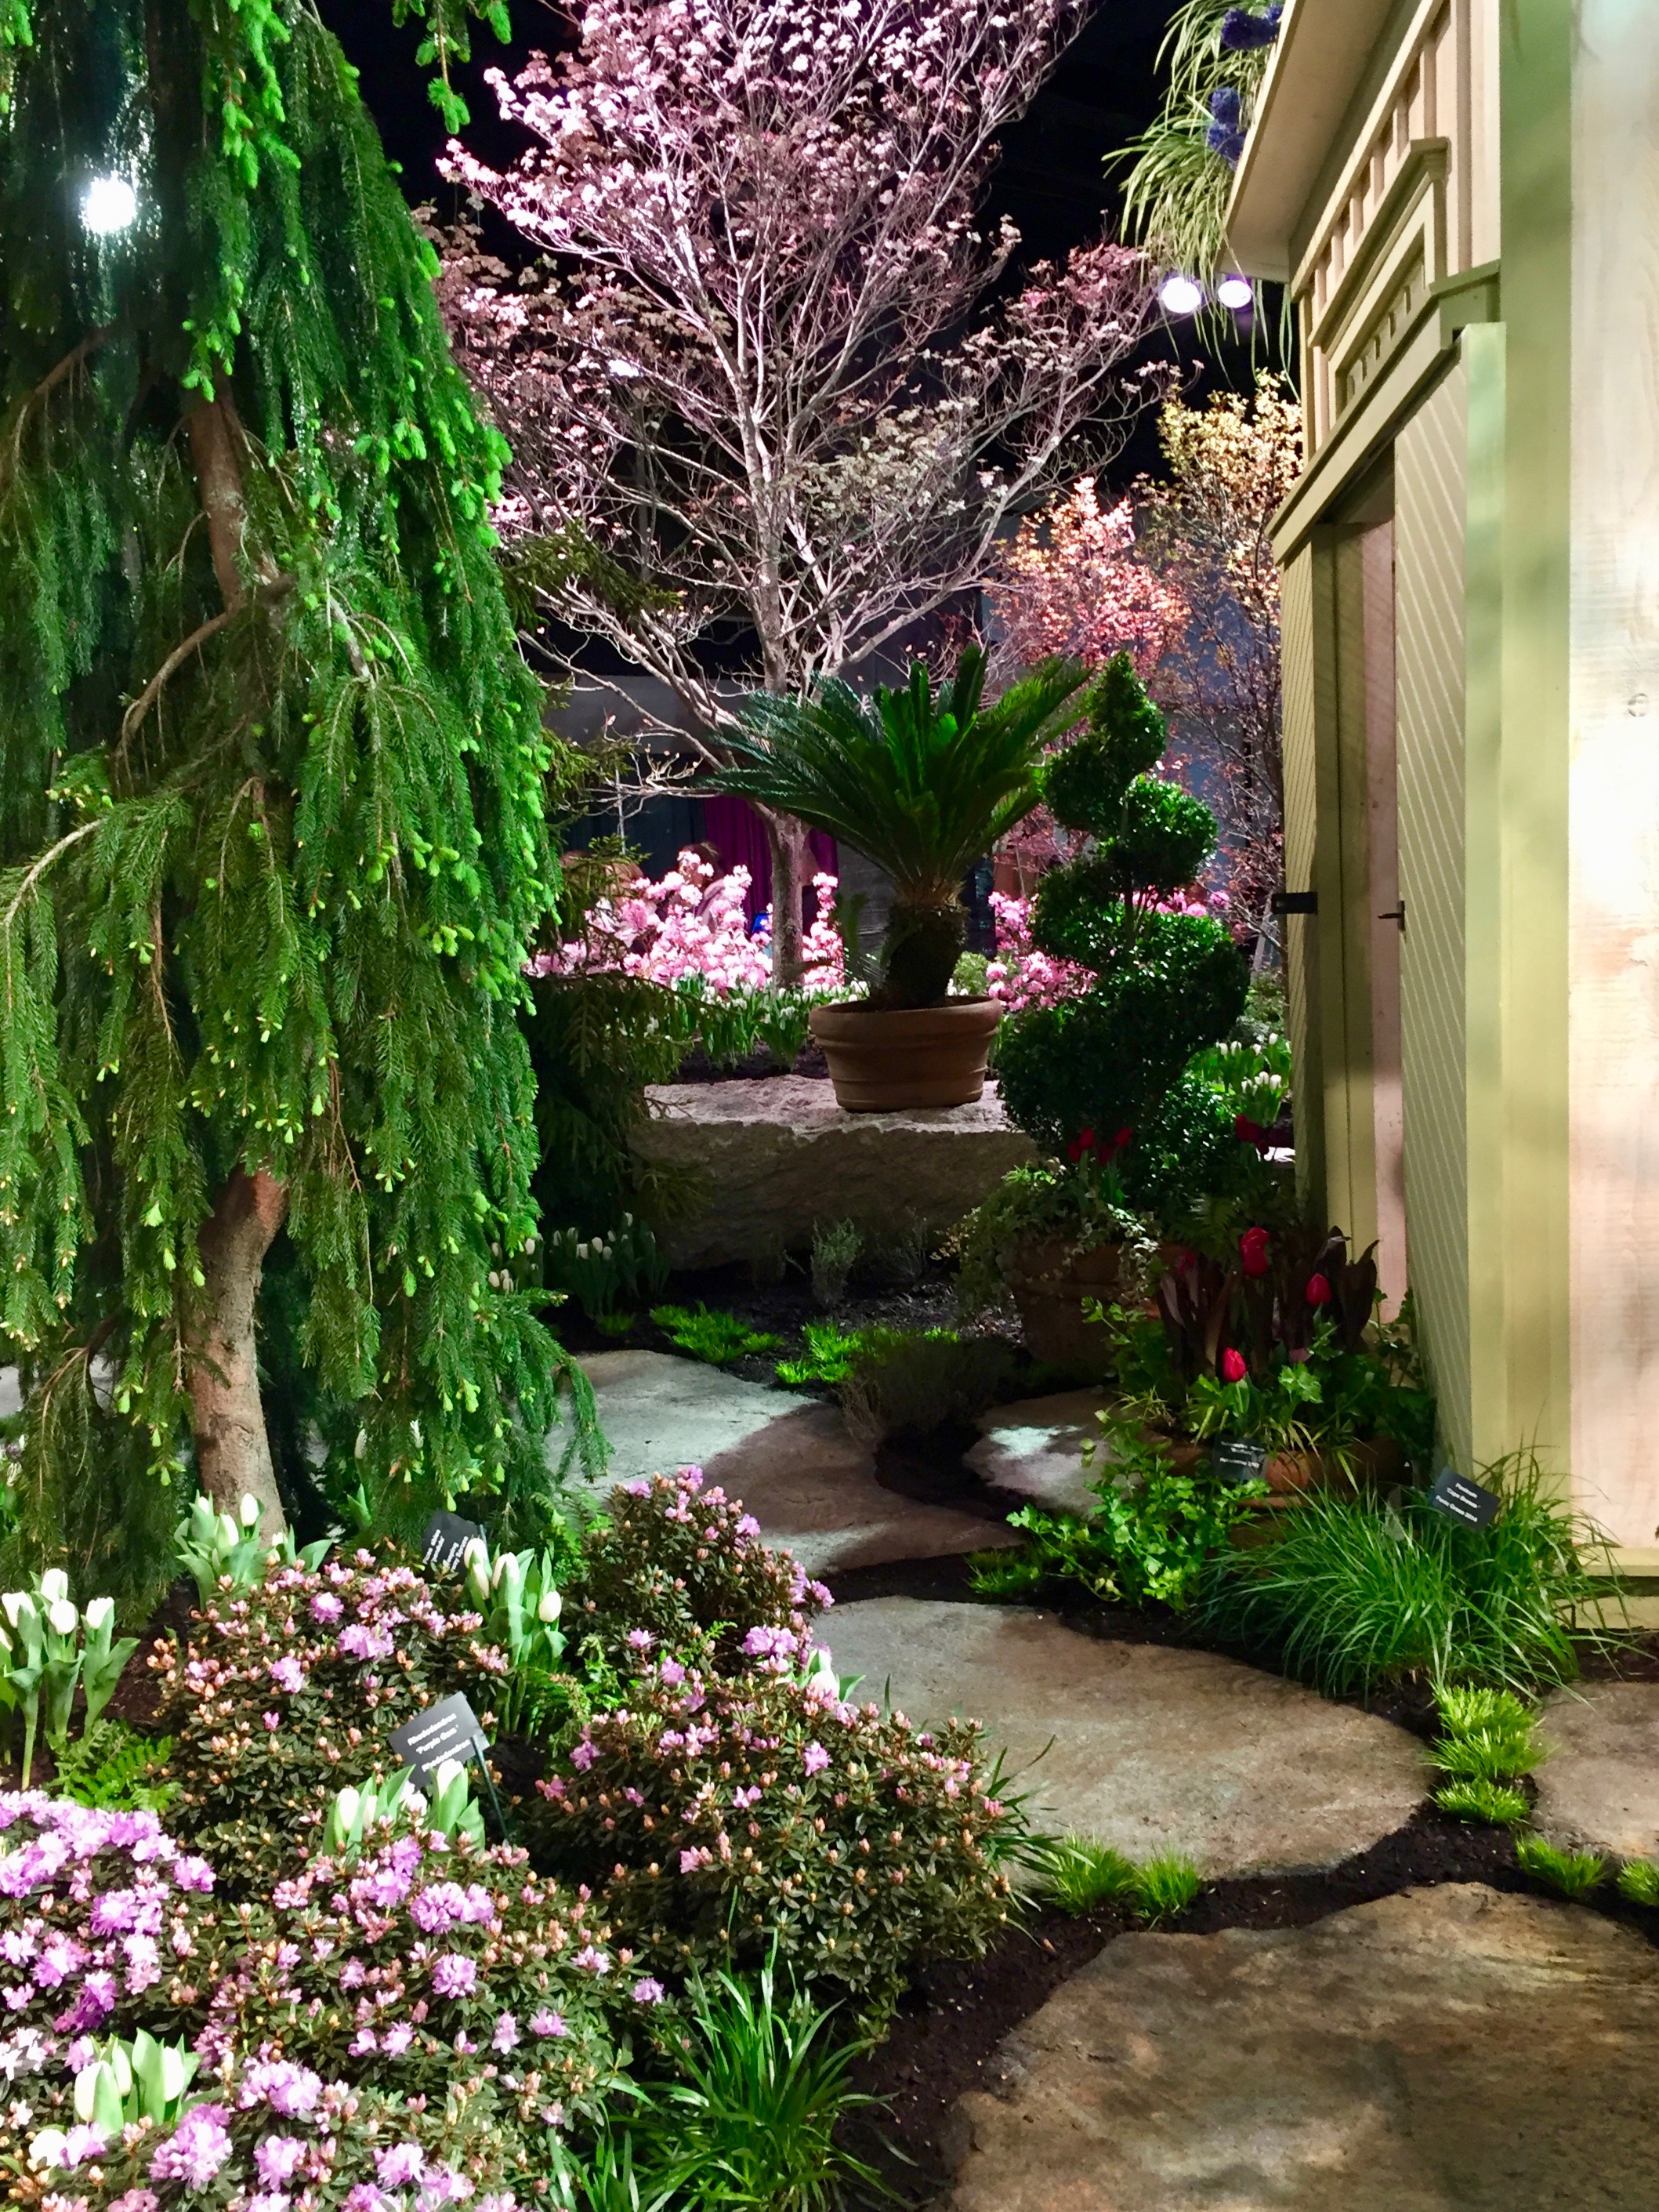 It's the weekend, number 95, Boston Flower and Garden Show exhibit